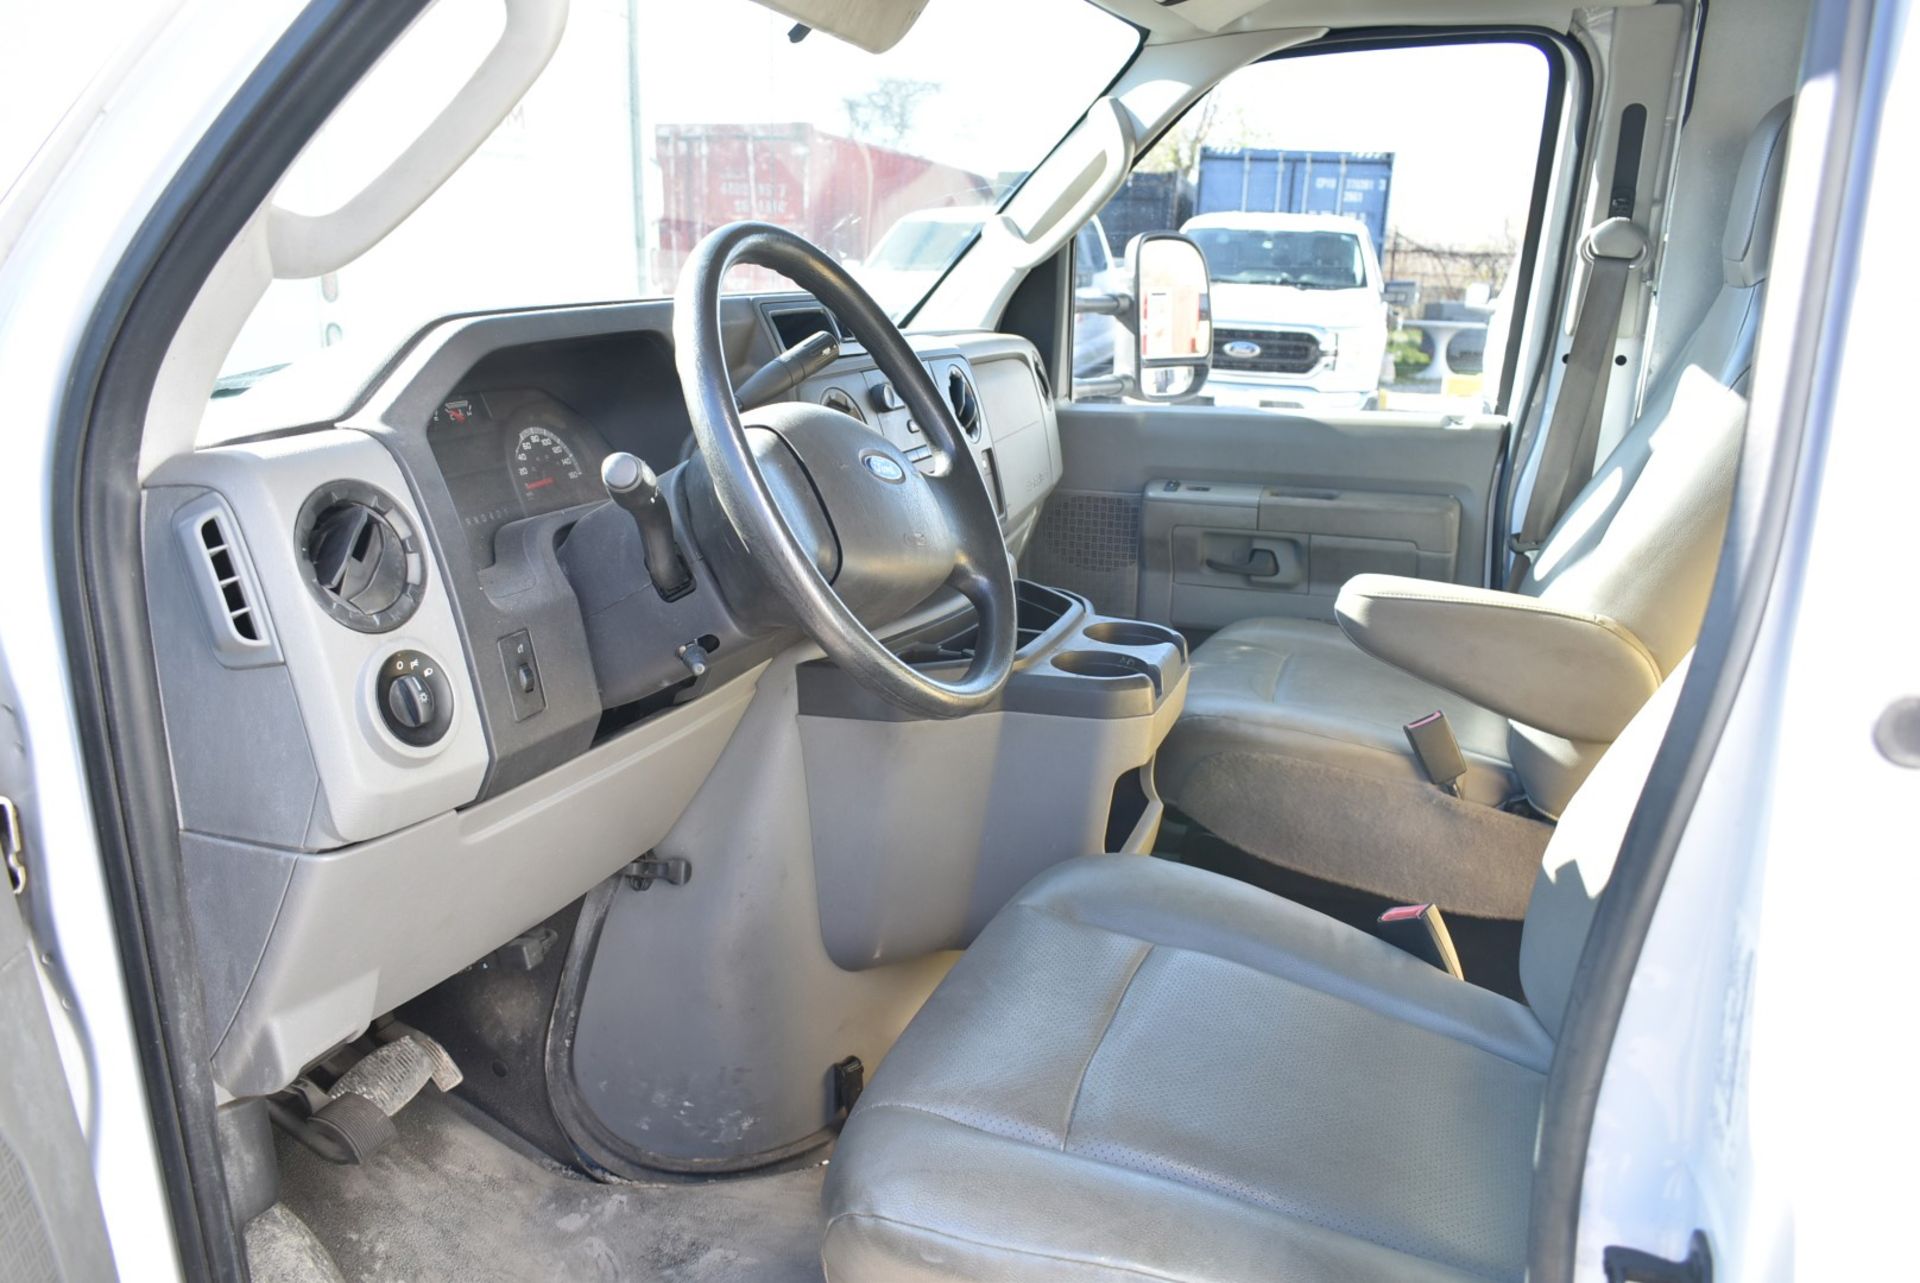 FORD (2018) E450 SUPER DUTY CUBE VAN WITH 6.8L 10 CYL. GAS ENGINE, AUTO. TRANSMISSION, 89,235 KM ( - Image 10 of 13